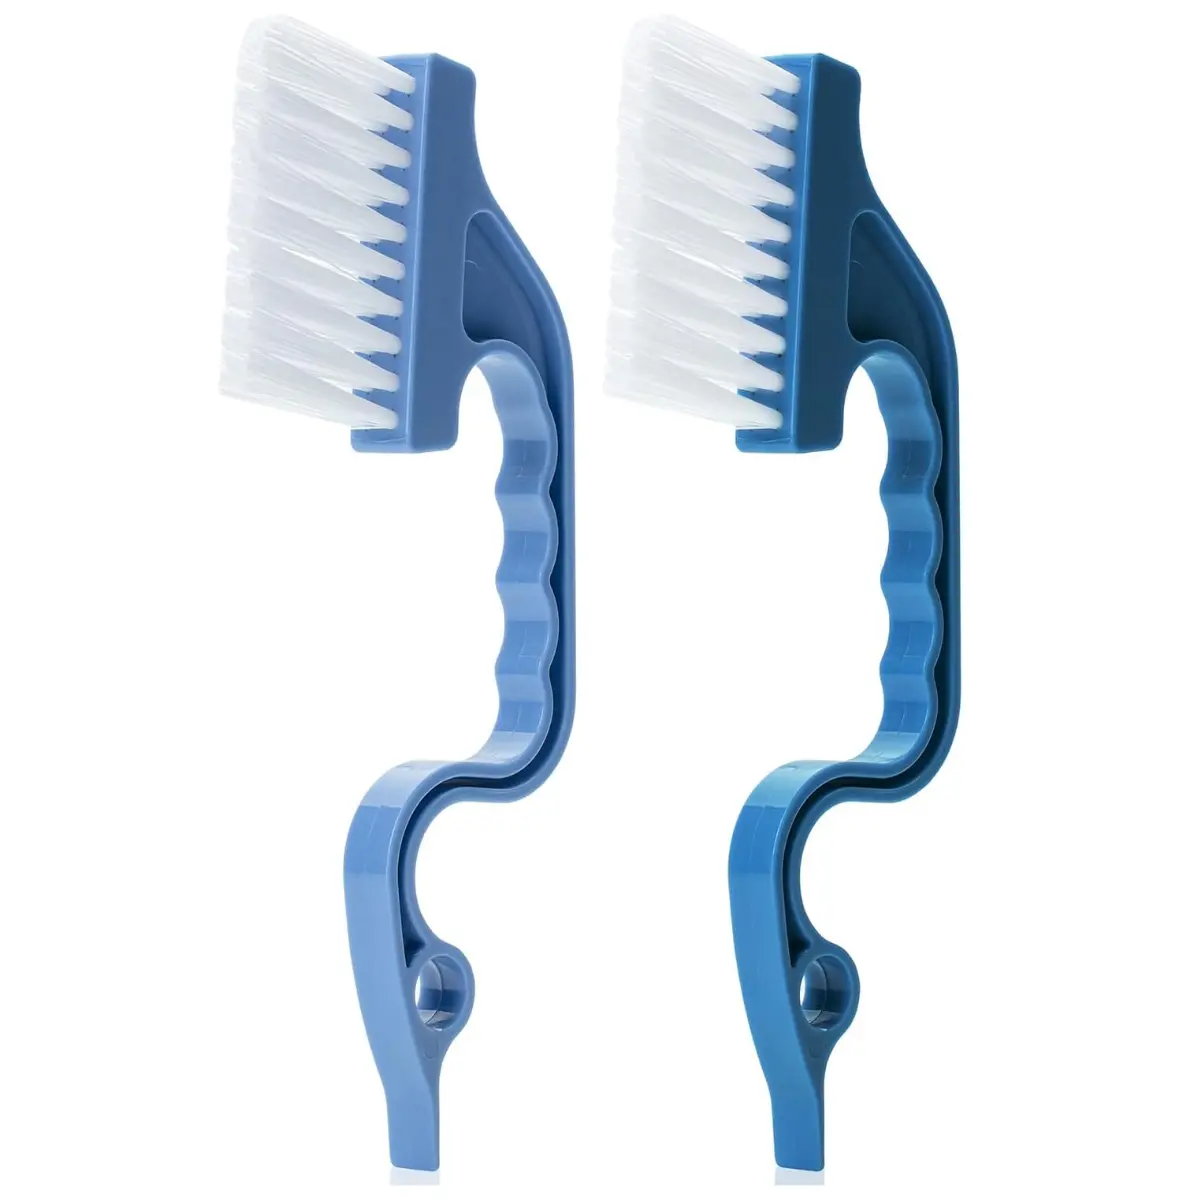 2pcs Crevice Cleaning Brush Multifunctional Grout Cleaner